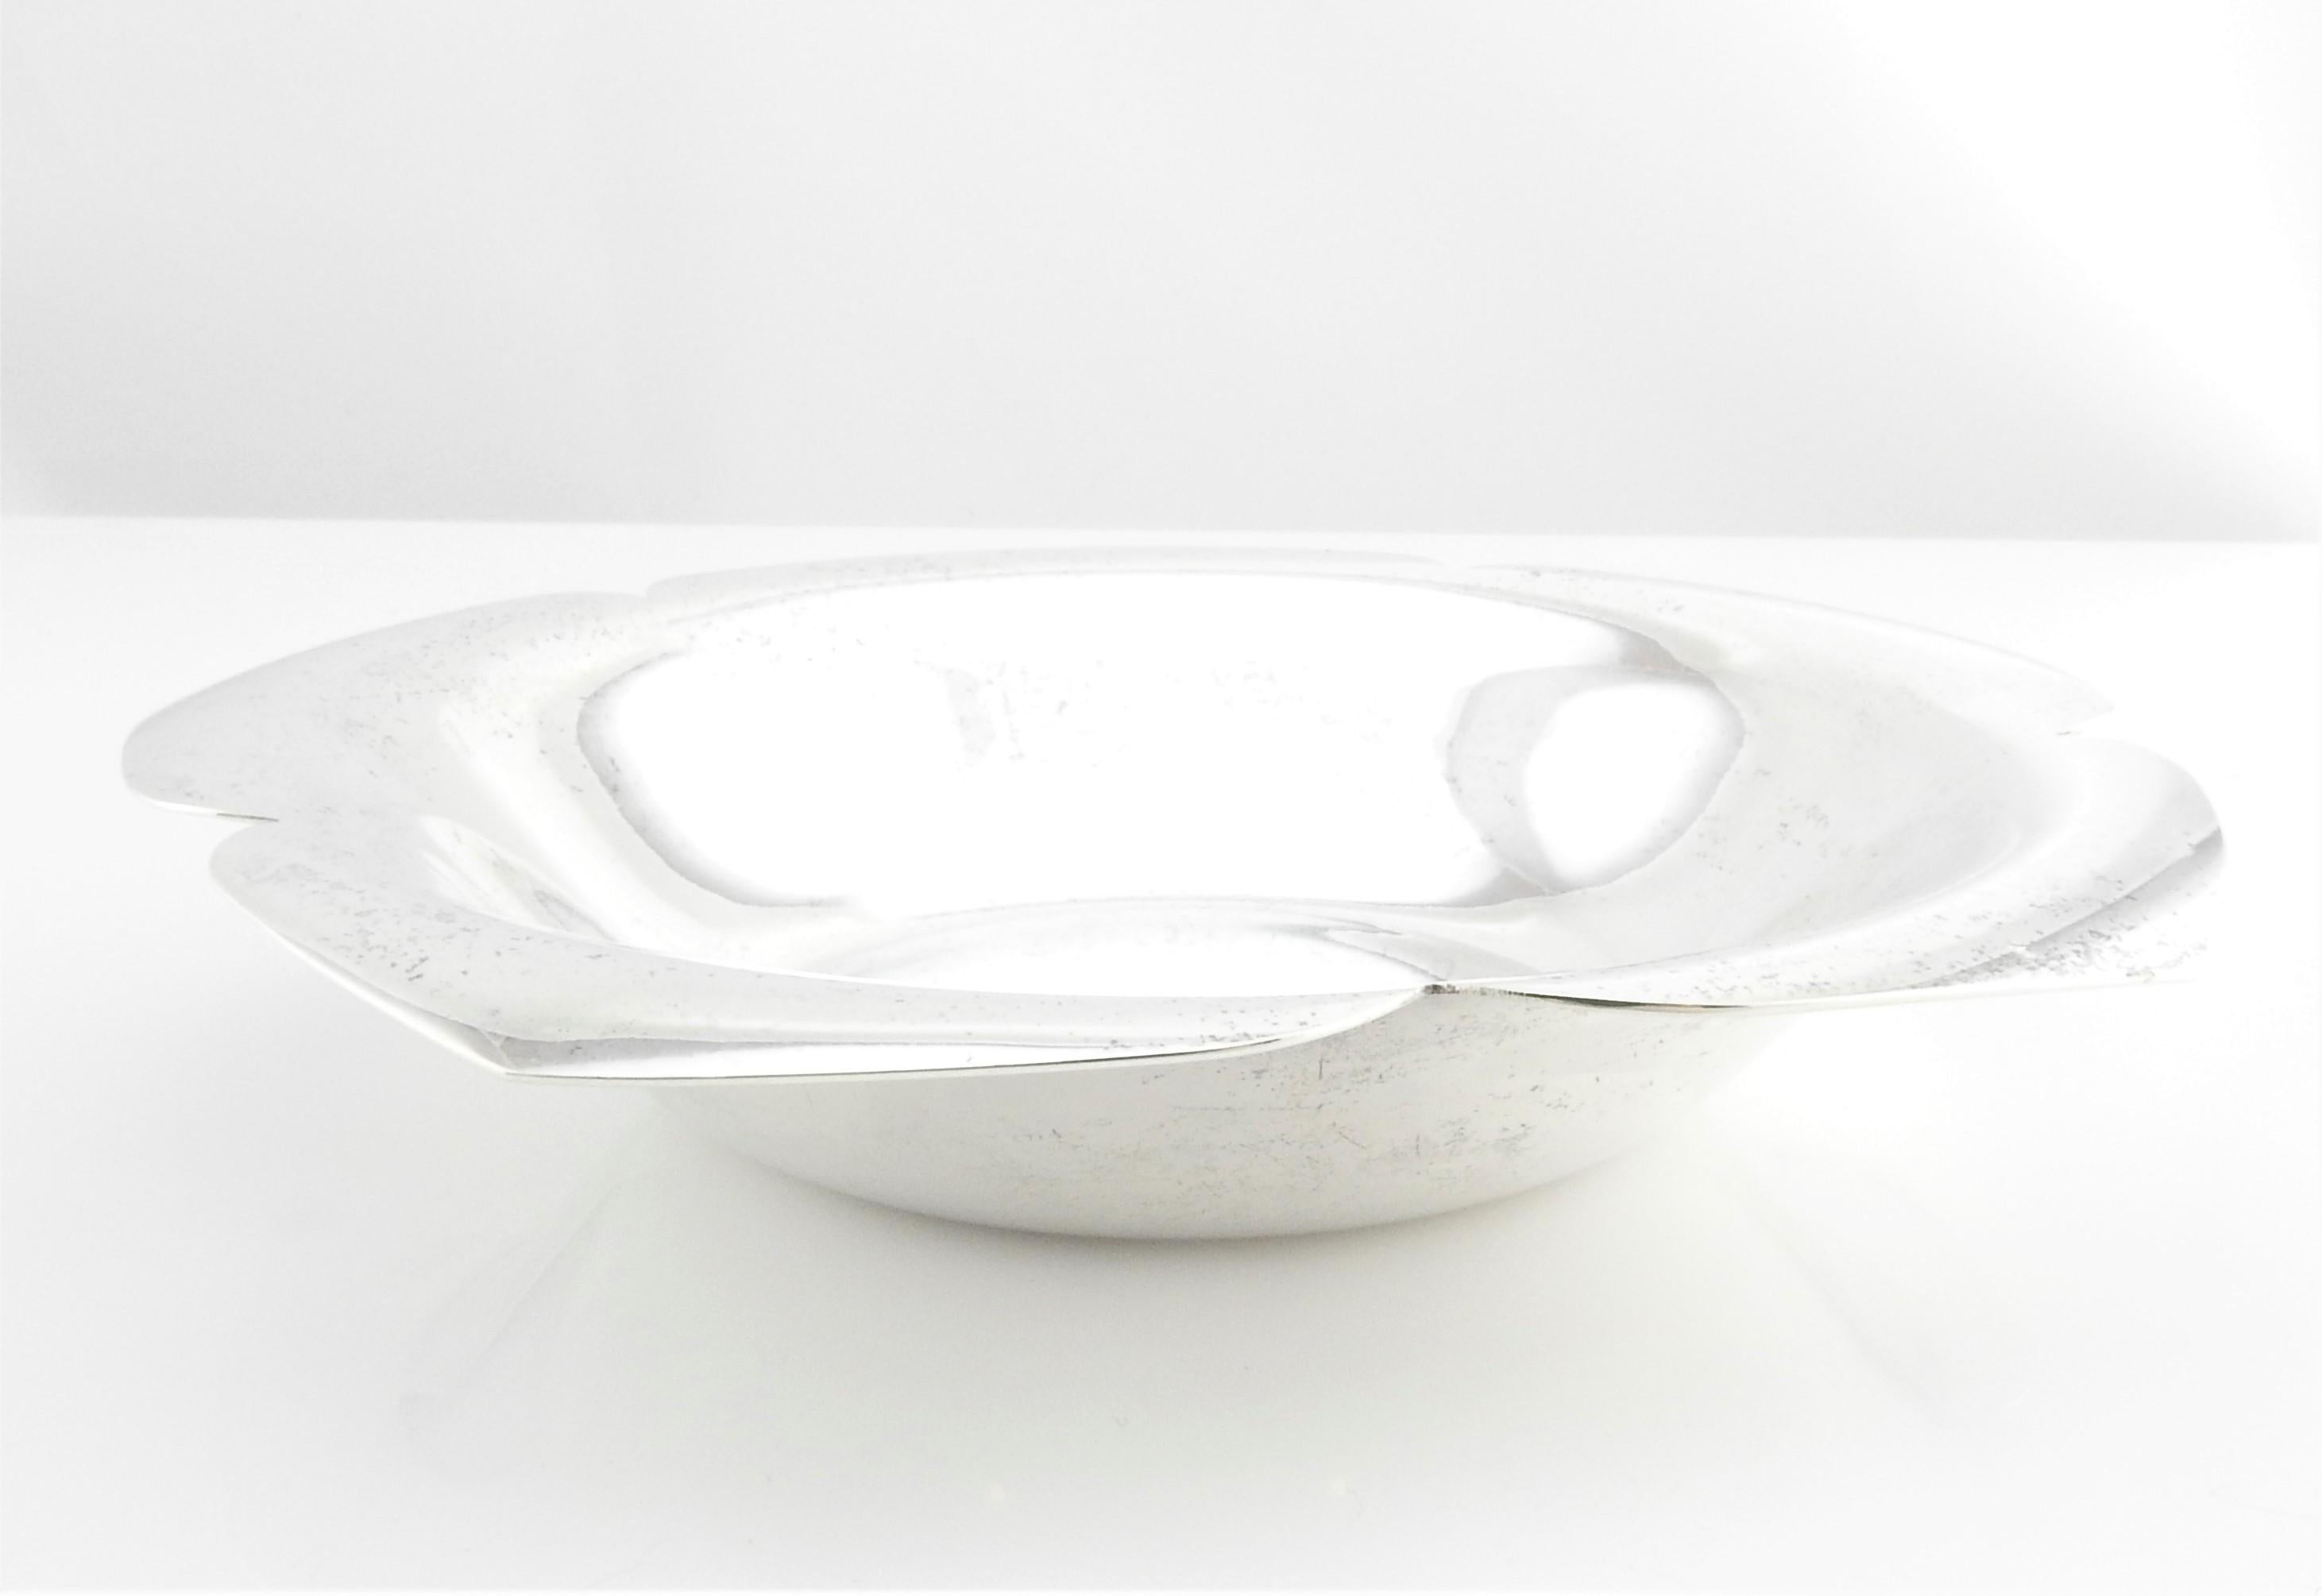 Tiffany & Co Makers Sterling Silver 23458 Lotus Flower Bowl

This is a beautiful vintage Tiffany & Co sterling silver lotus flower bowl. 

Measurements: Measures 5 1/4 inches across.  

Weight:  118.1 g / 75.9 dwt   

Condition:  In good condition